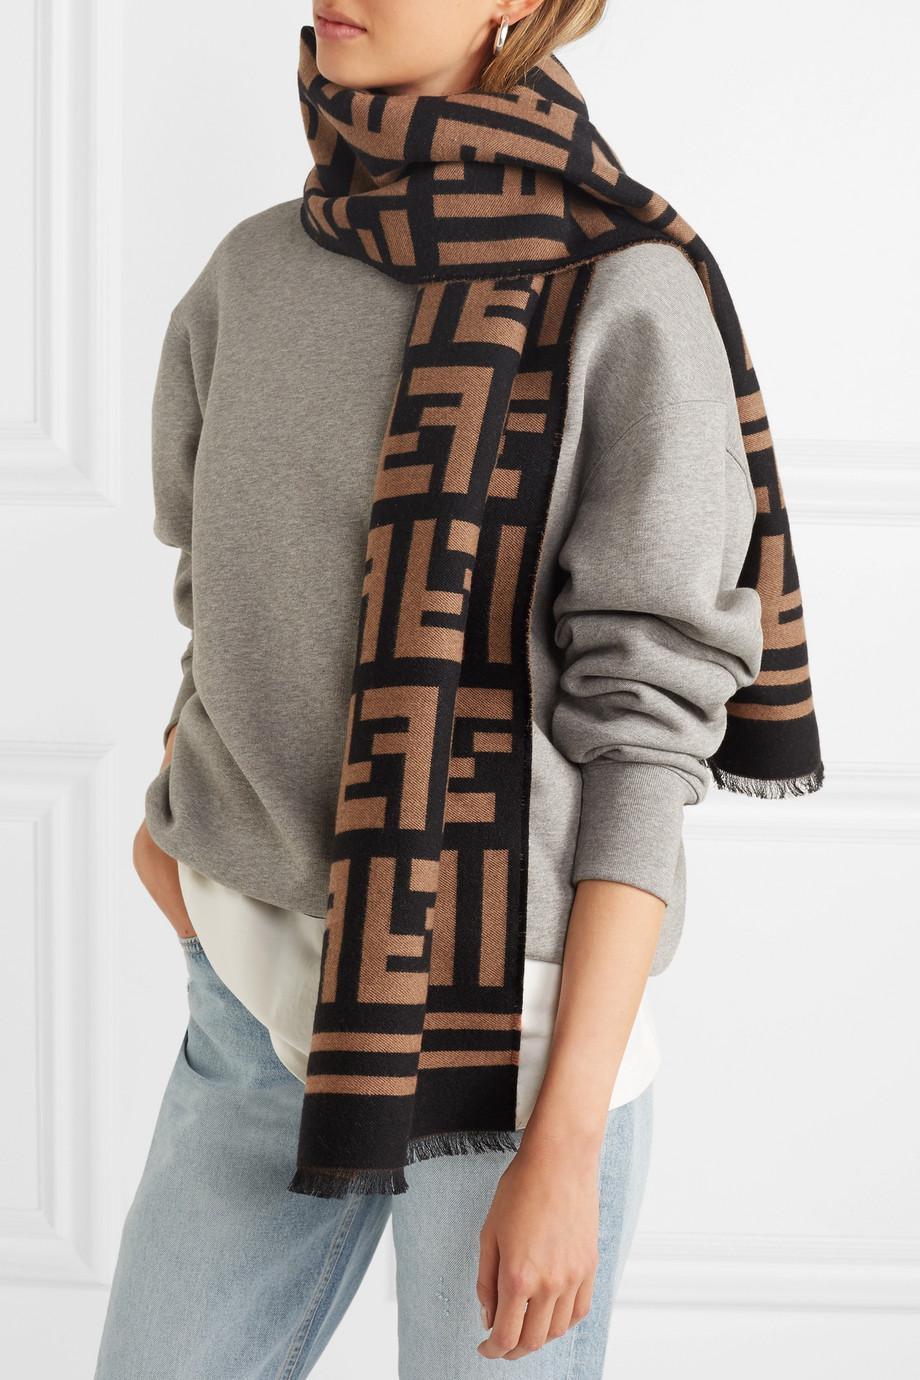 Fendi Wool And Silk-blend Jacquard Scarf in Brown | Lyst